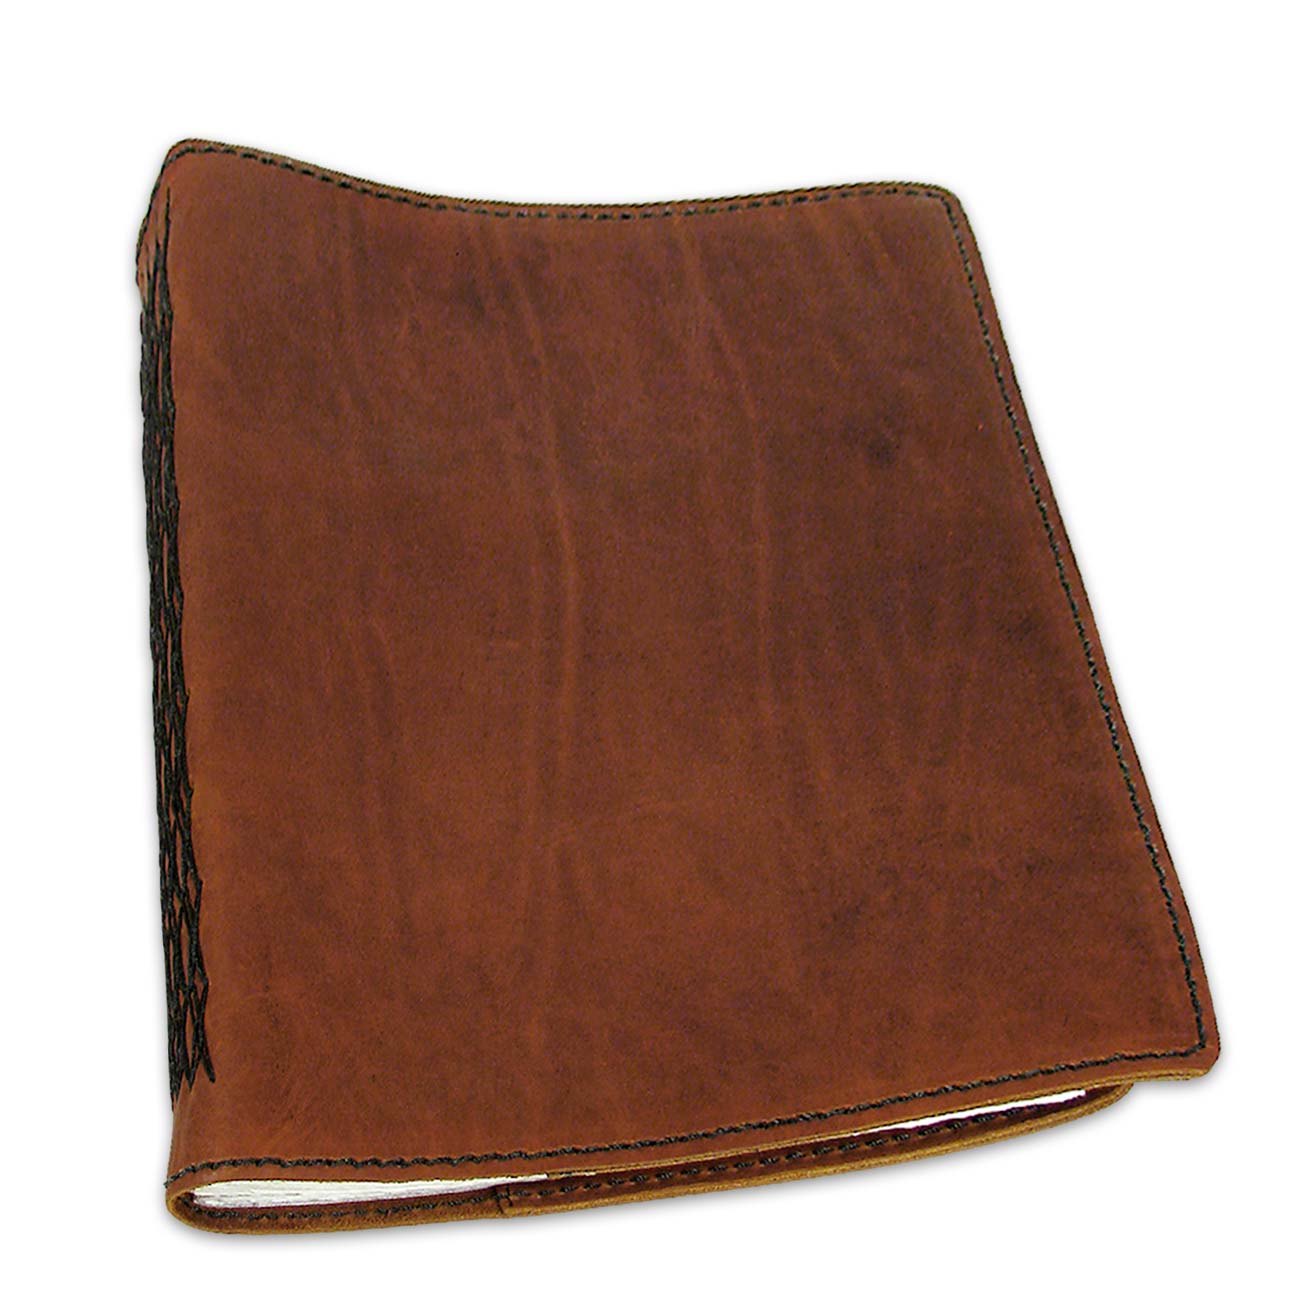 Universal A5 Cover - Innovative Journaling